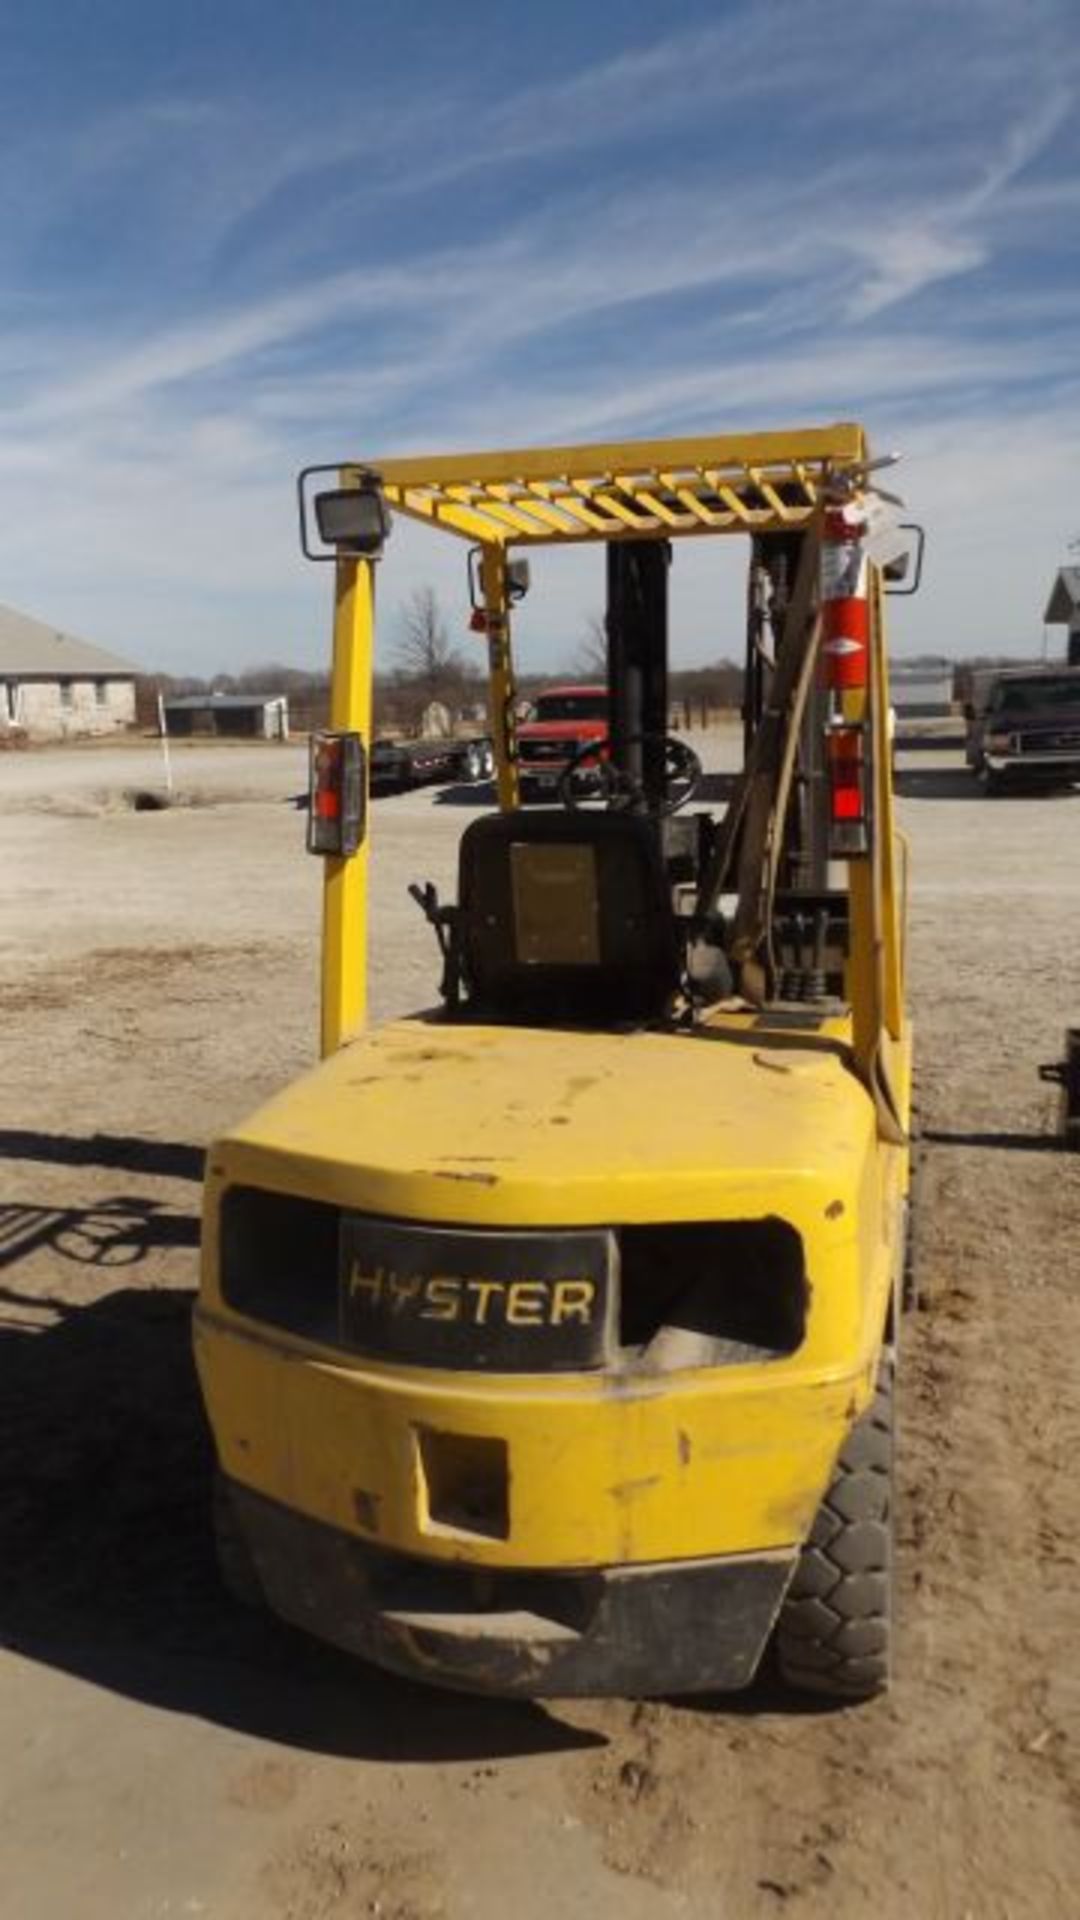 Hyster 60 Fork Lift 1029 hrs, Gas, 3 Stage Low-Profile Mast, 48" Forks, 6000# Capacity - Image 4 of 4